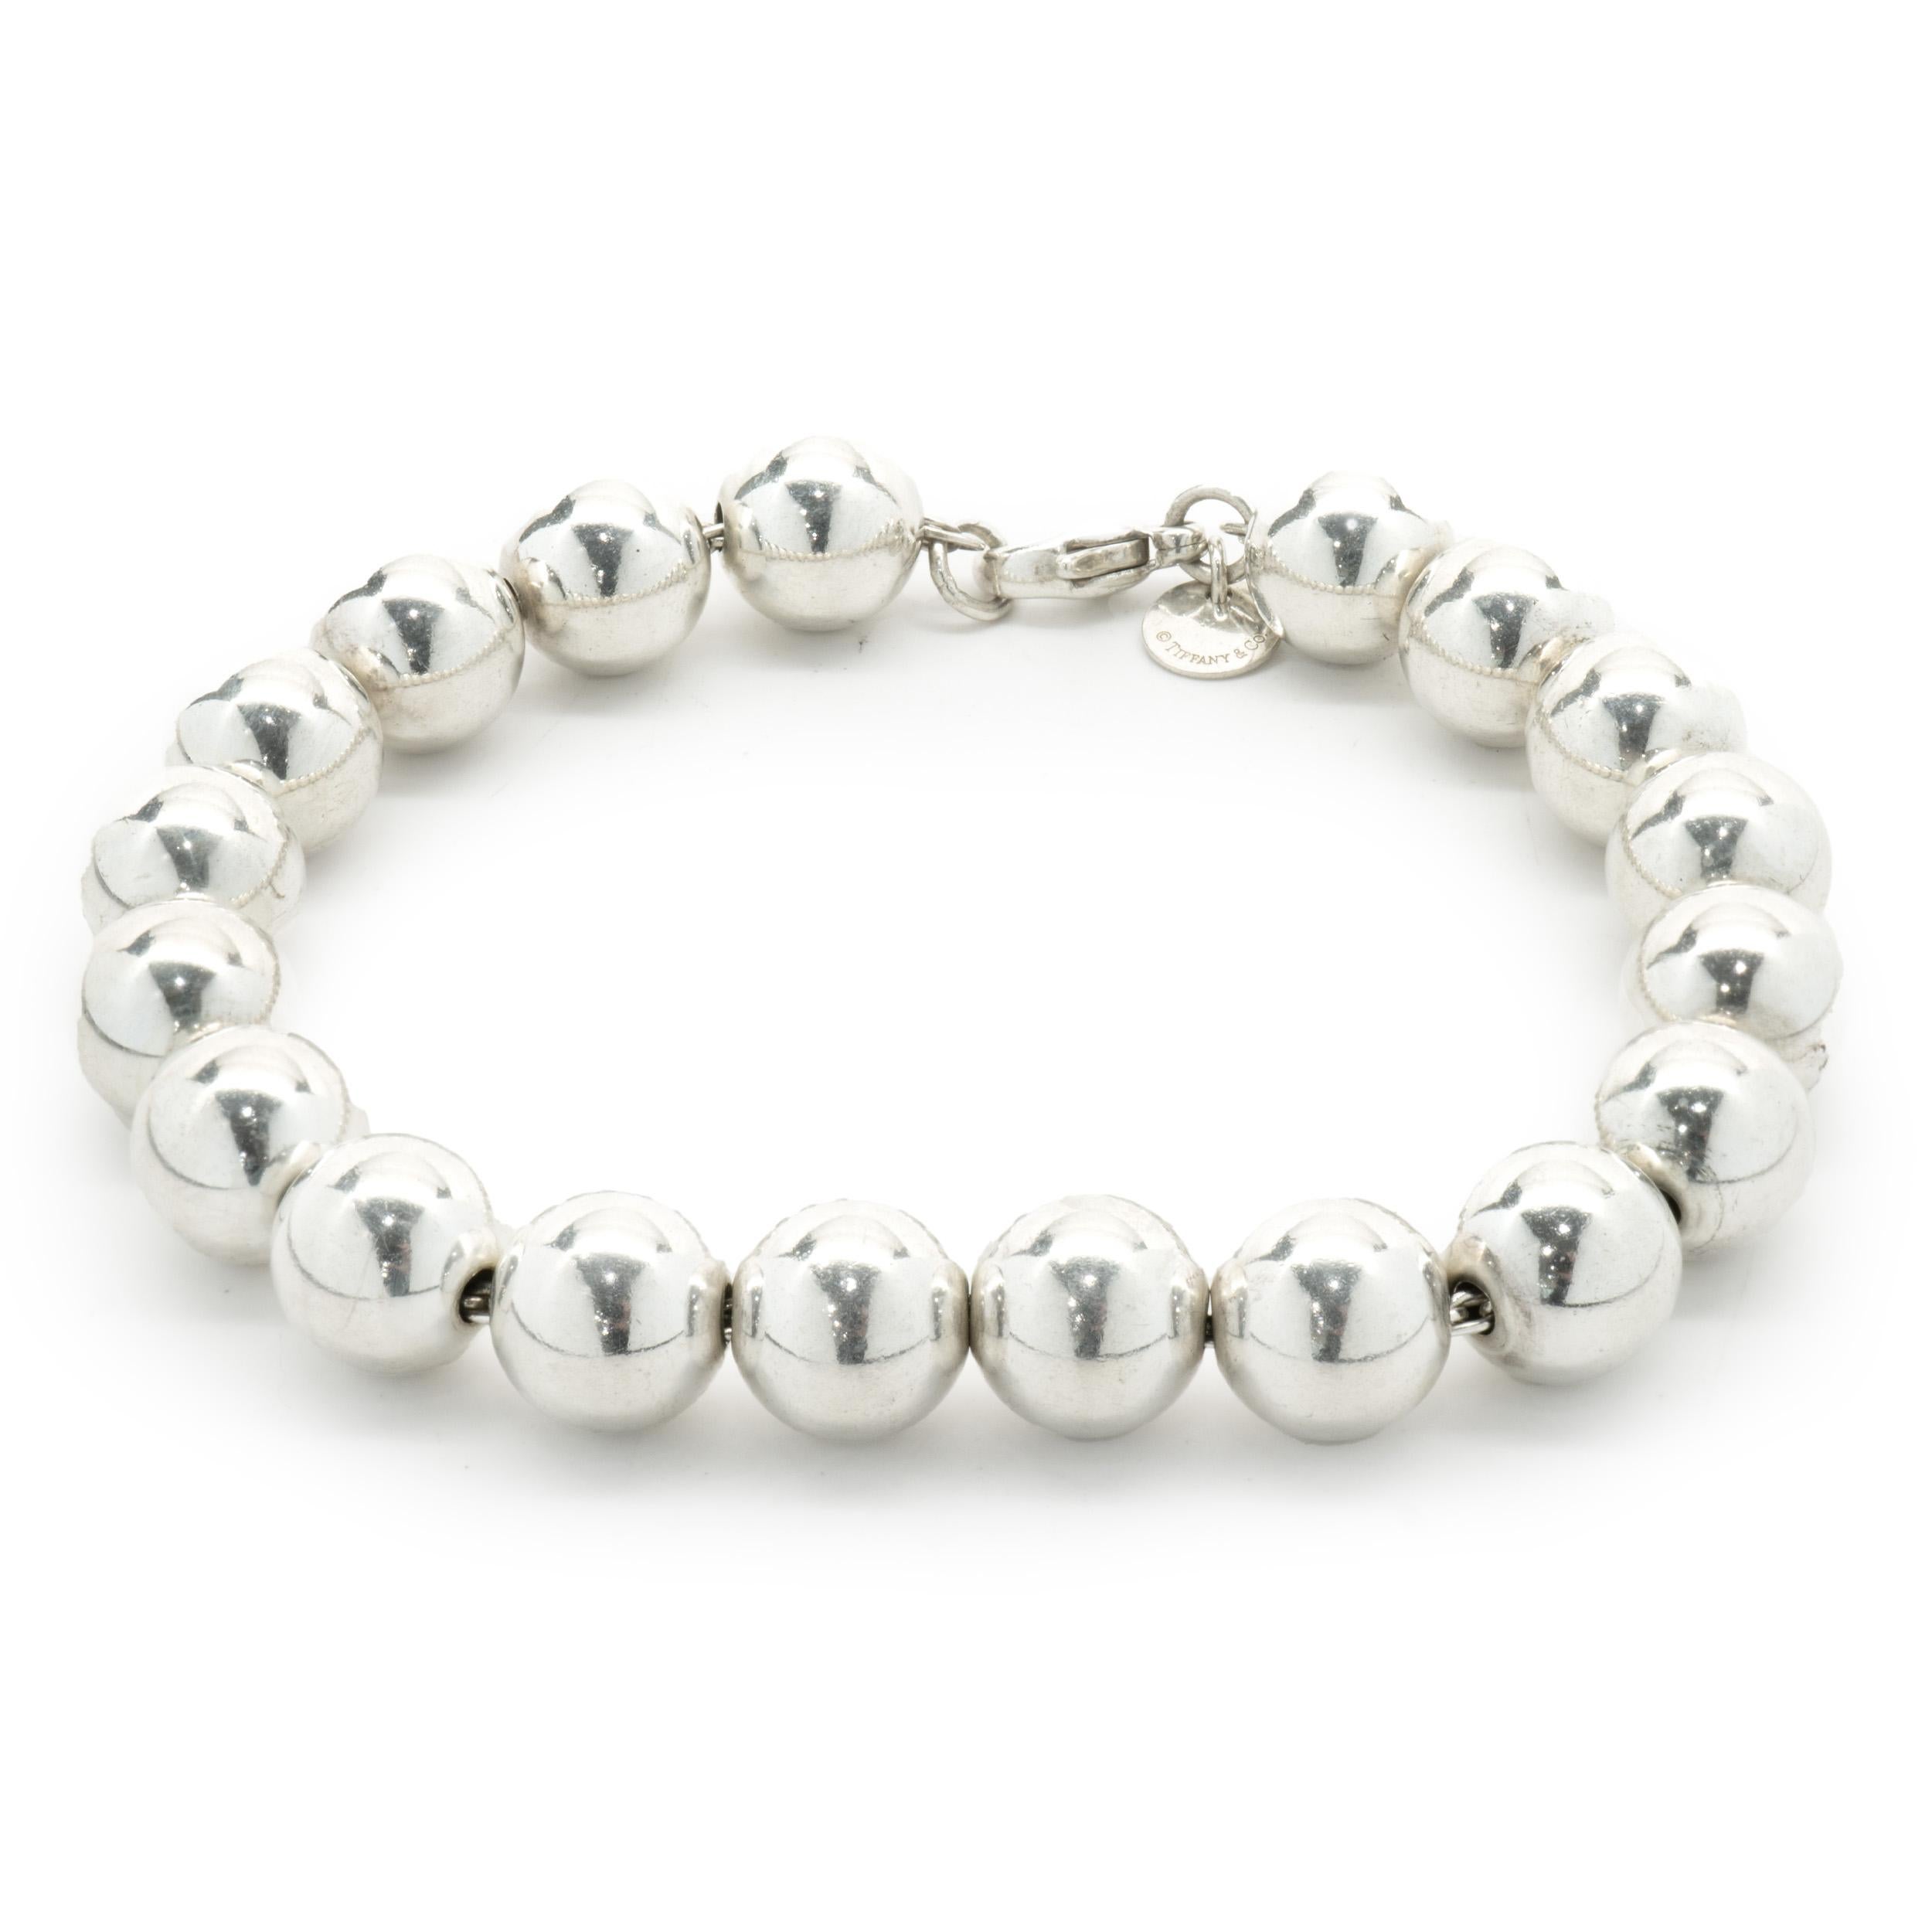 Designer: Tiffany & Co. 
Material: sterling silver
Dimensions: bracelet measures 8-inches in length
Weight: 21.07 grams